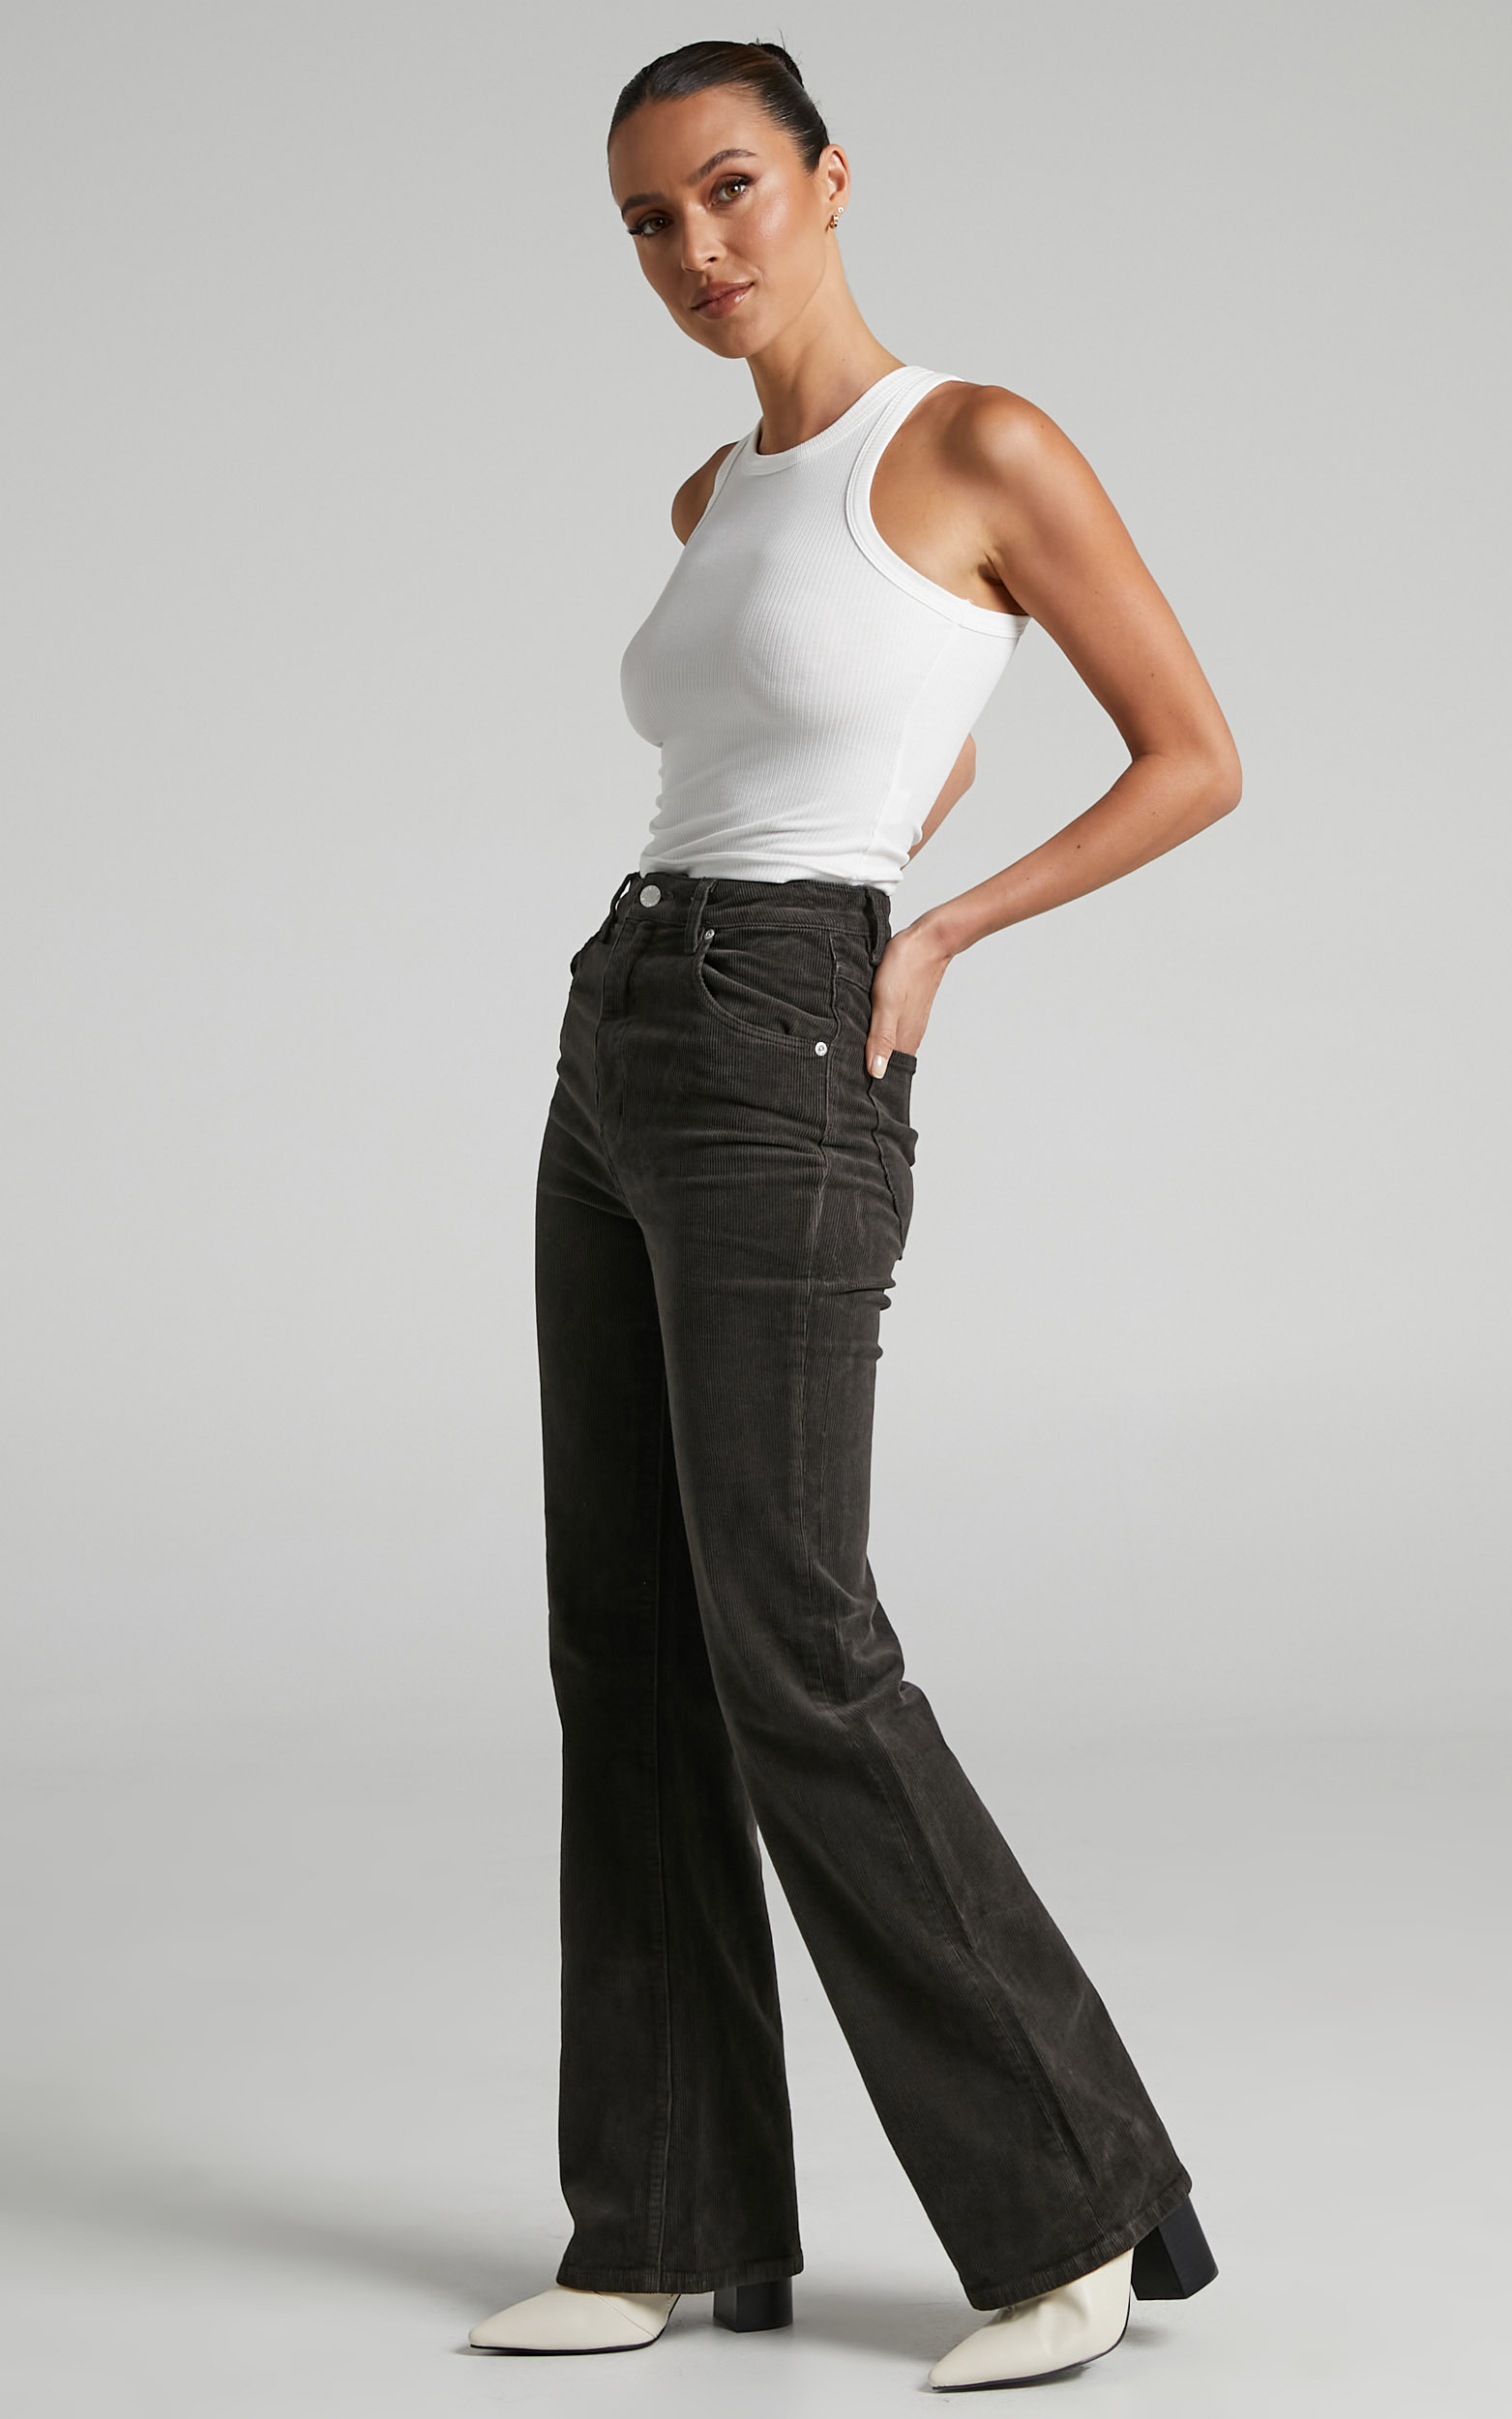 Phoebe Tonkin x Rolla's - DUSTERS BOOTCUT JEANS in ESPRESSO - 06, BRN1, hi-res image number null